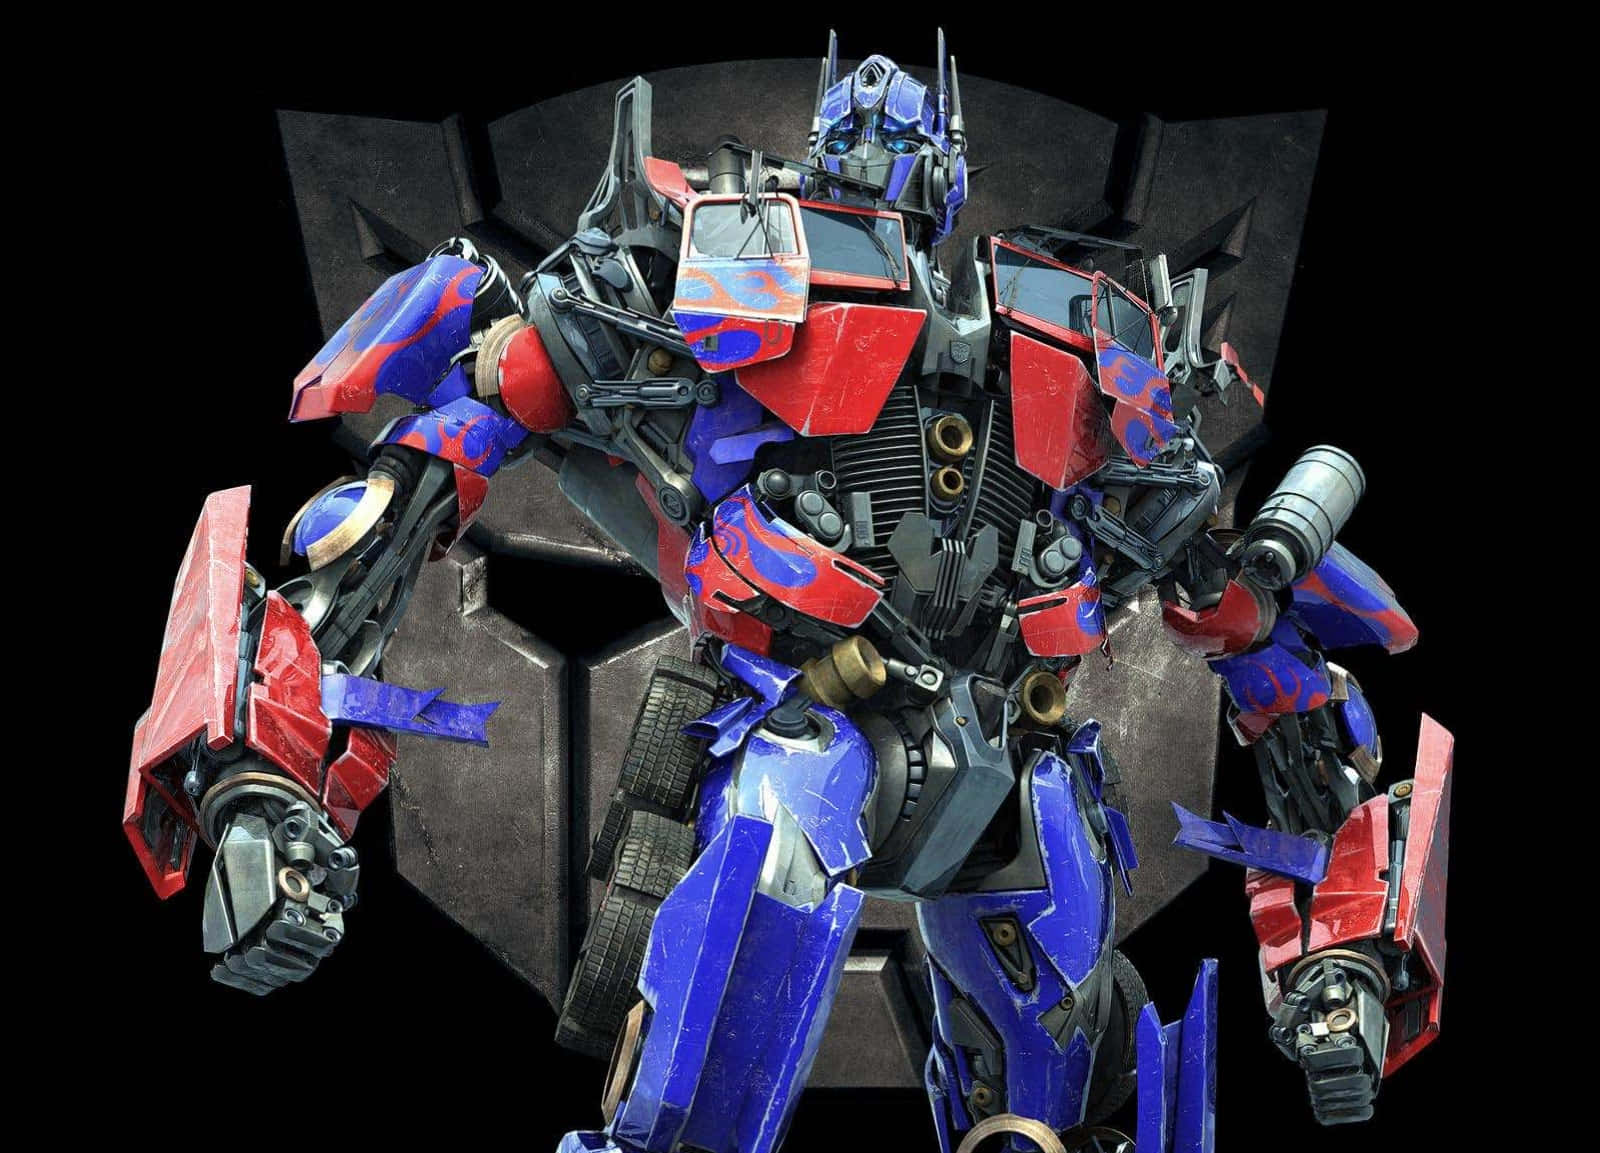 Optimus Prime, the Leader of the Autobots